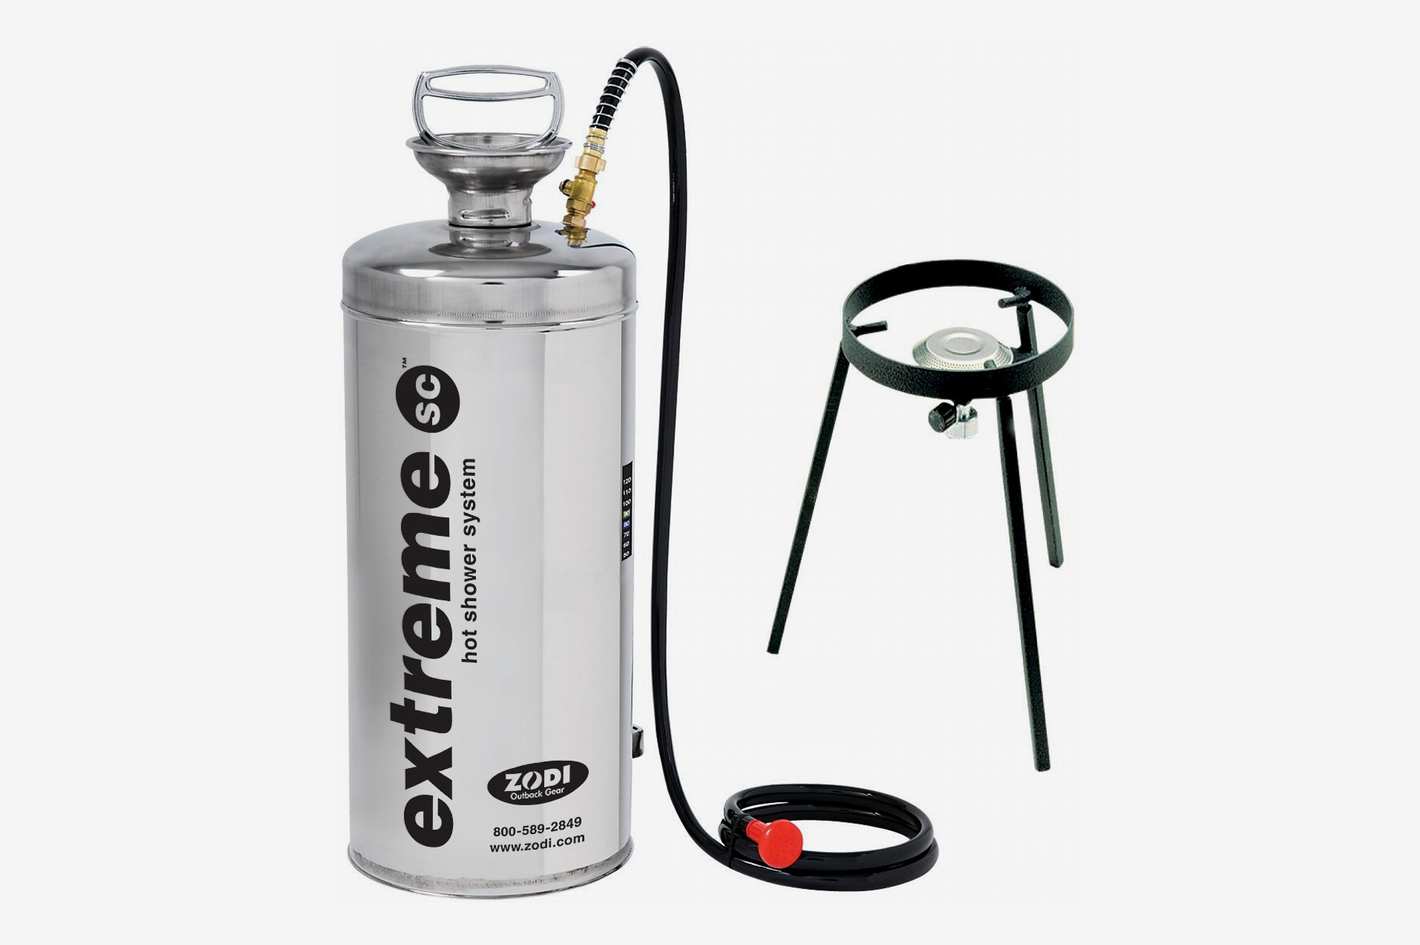 Zodi Outback Gear Extreme SC Hot Shower